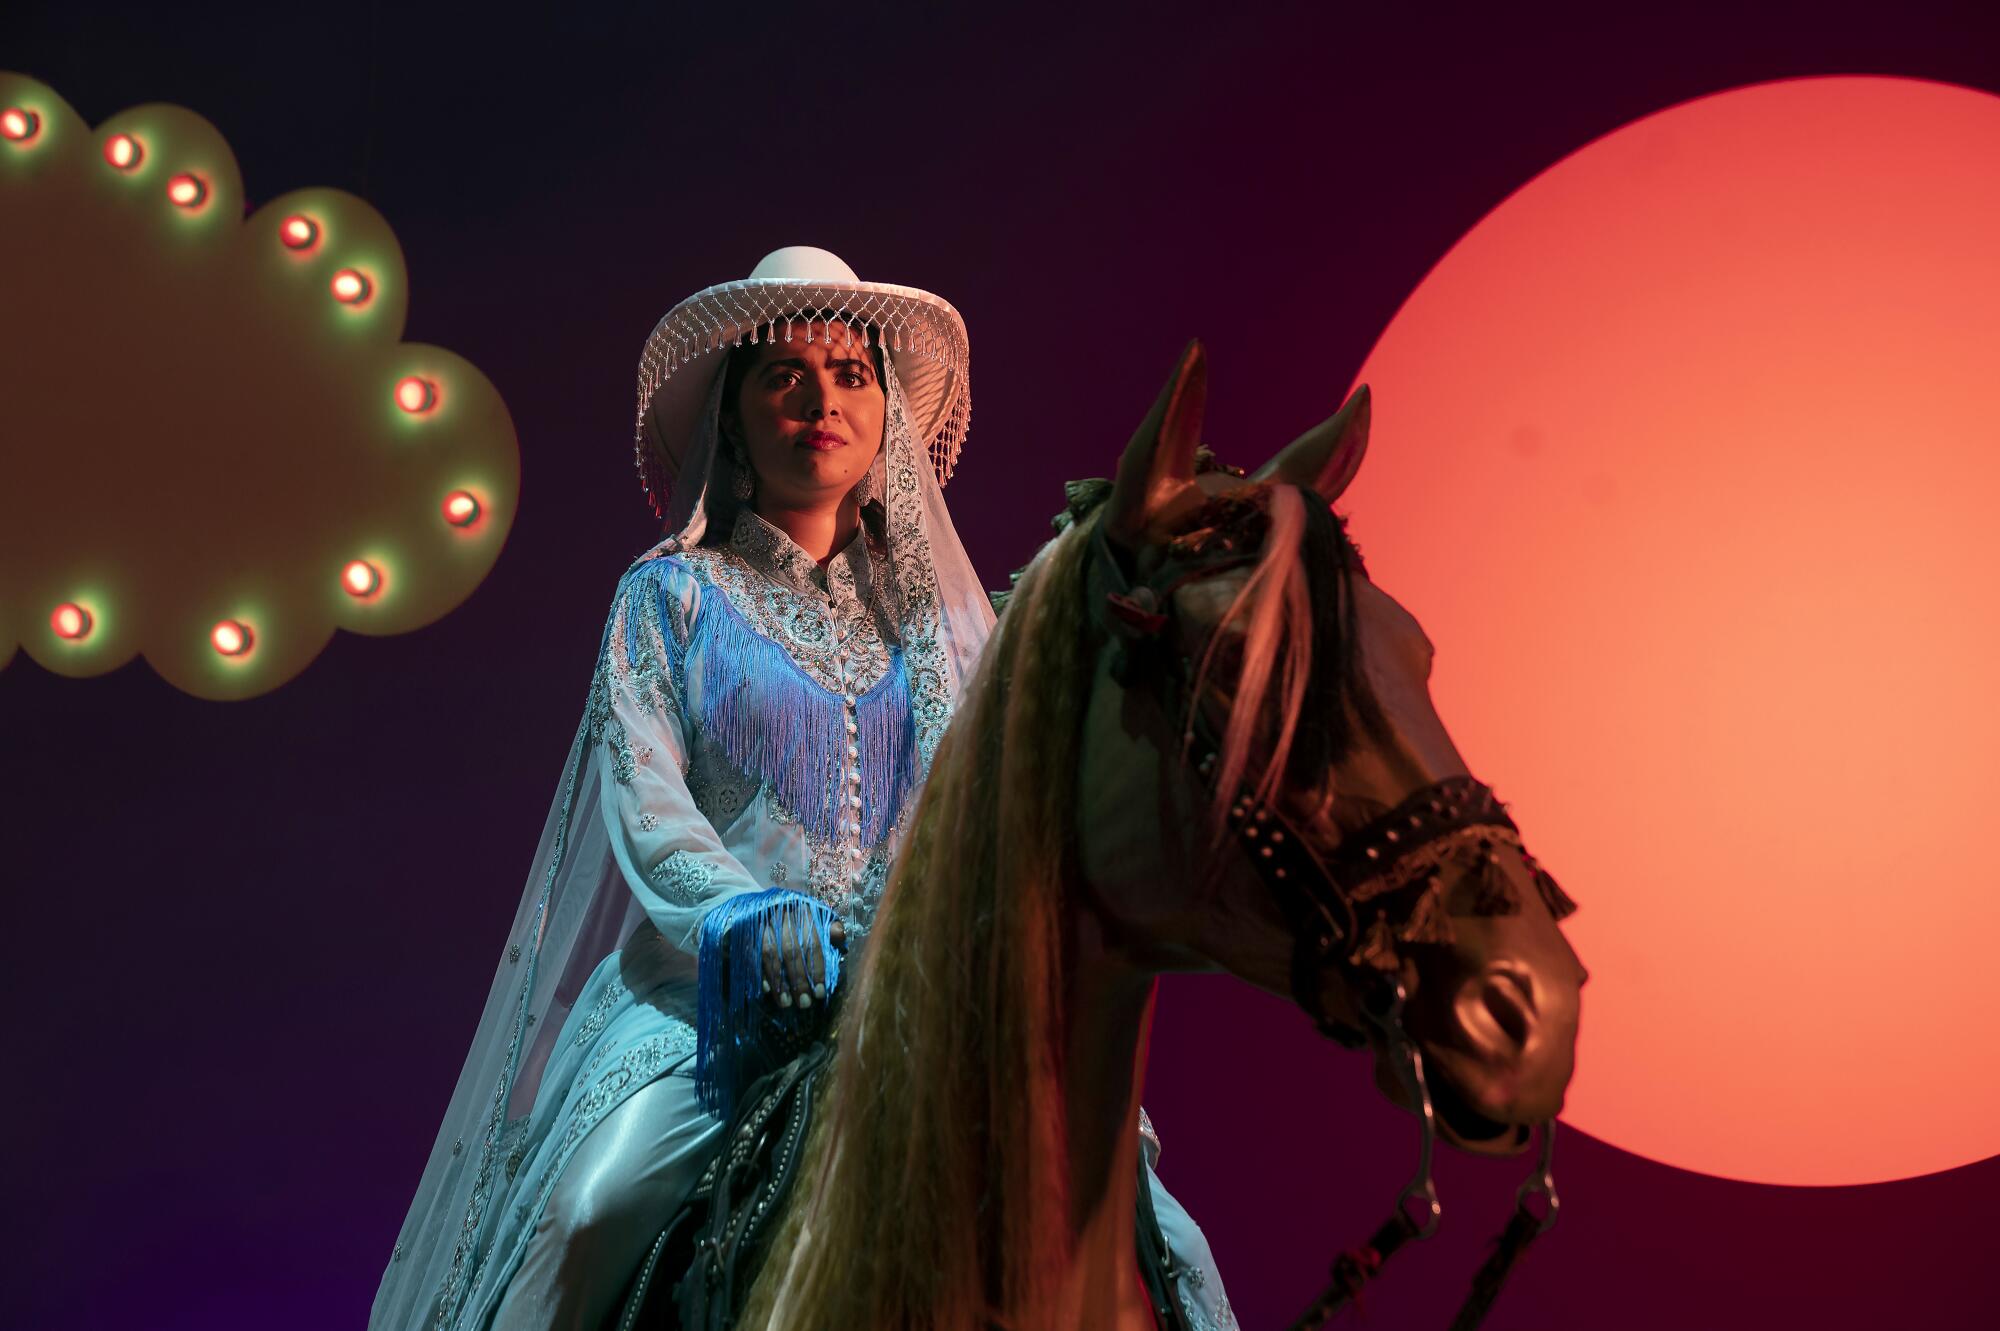 Malala Yousafzai sits atop a brown horse wearing a cowboy shirt and a beaded hat hanging from the brim.